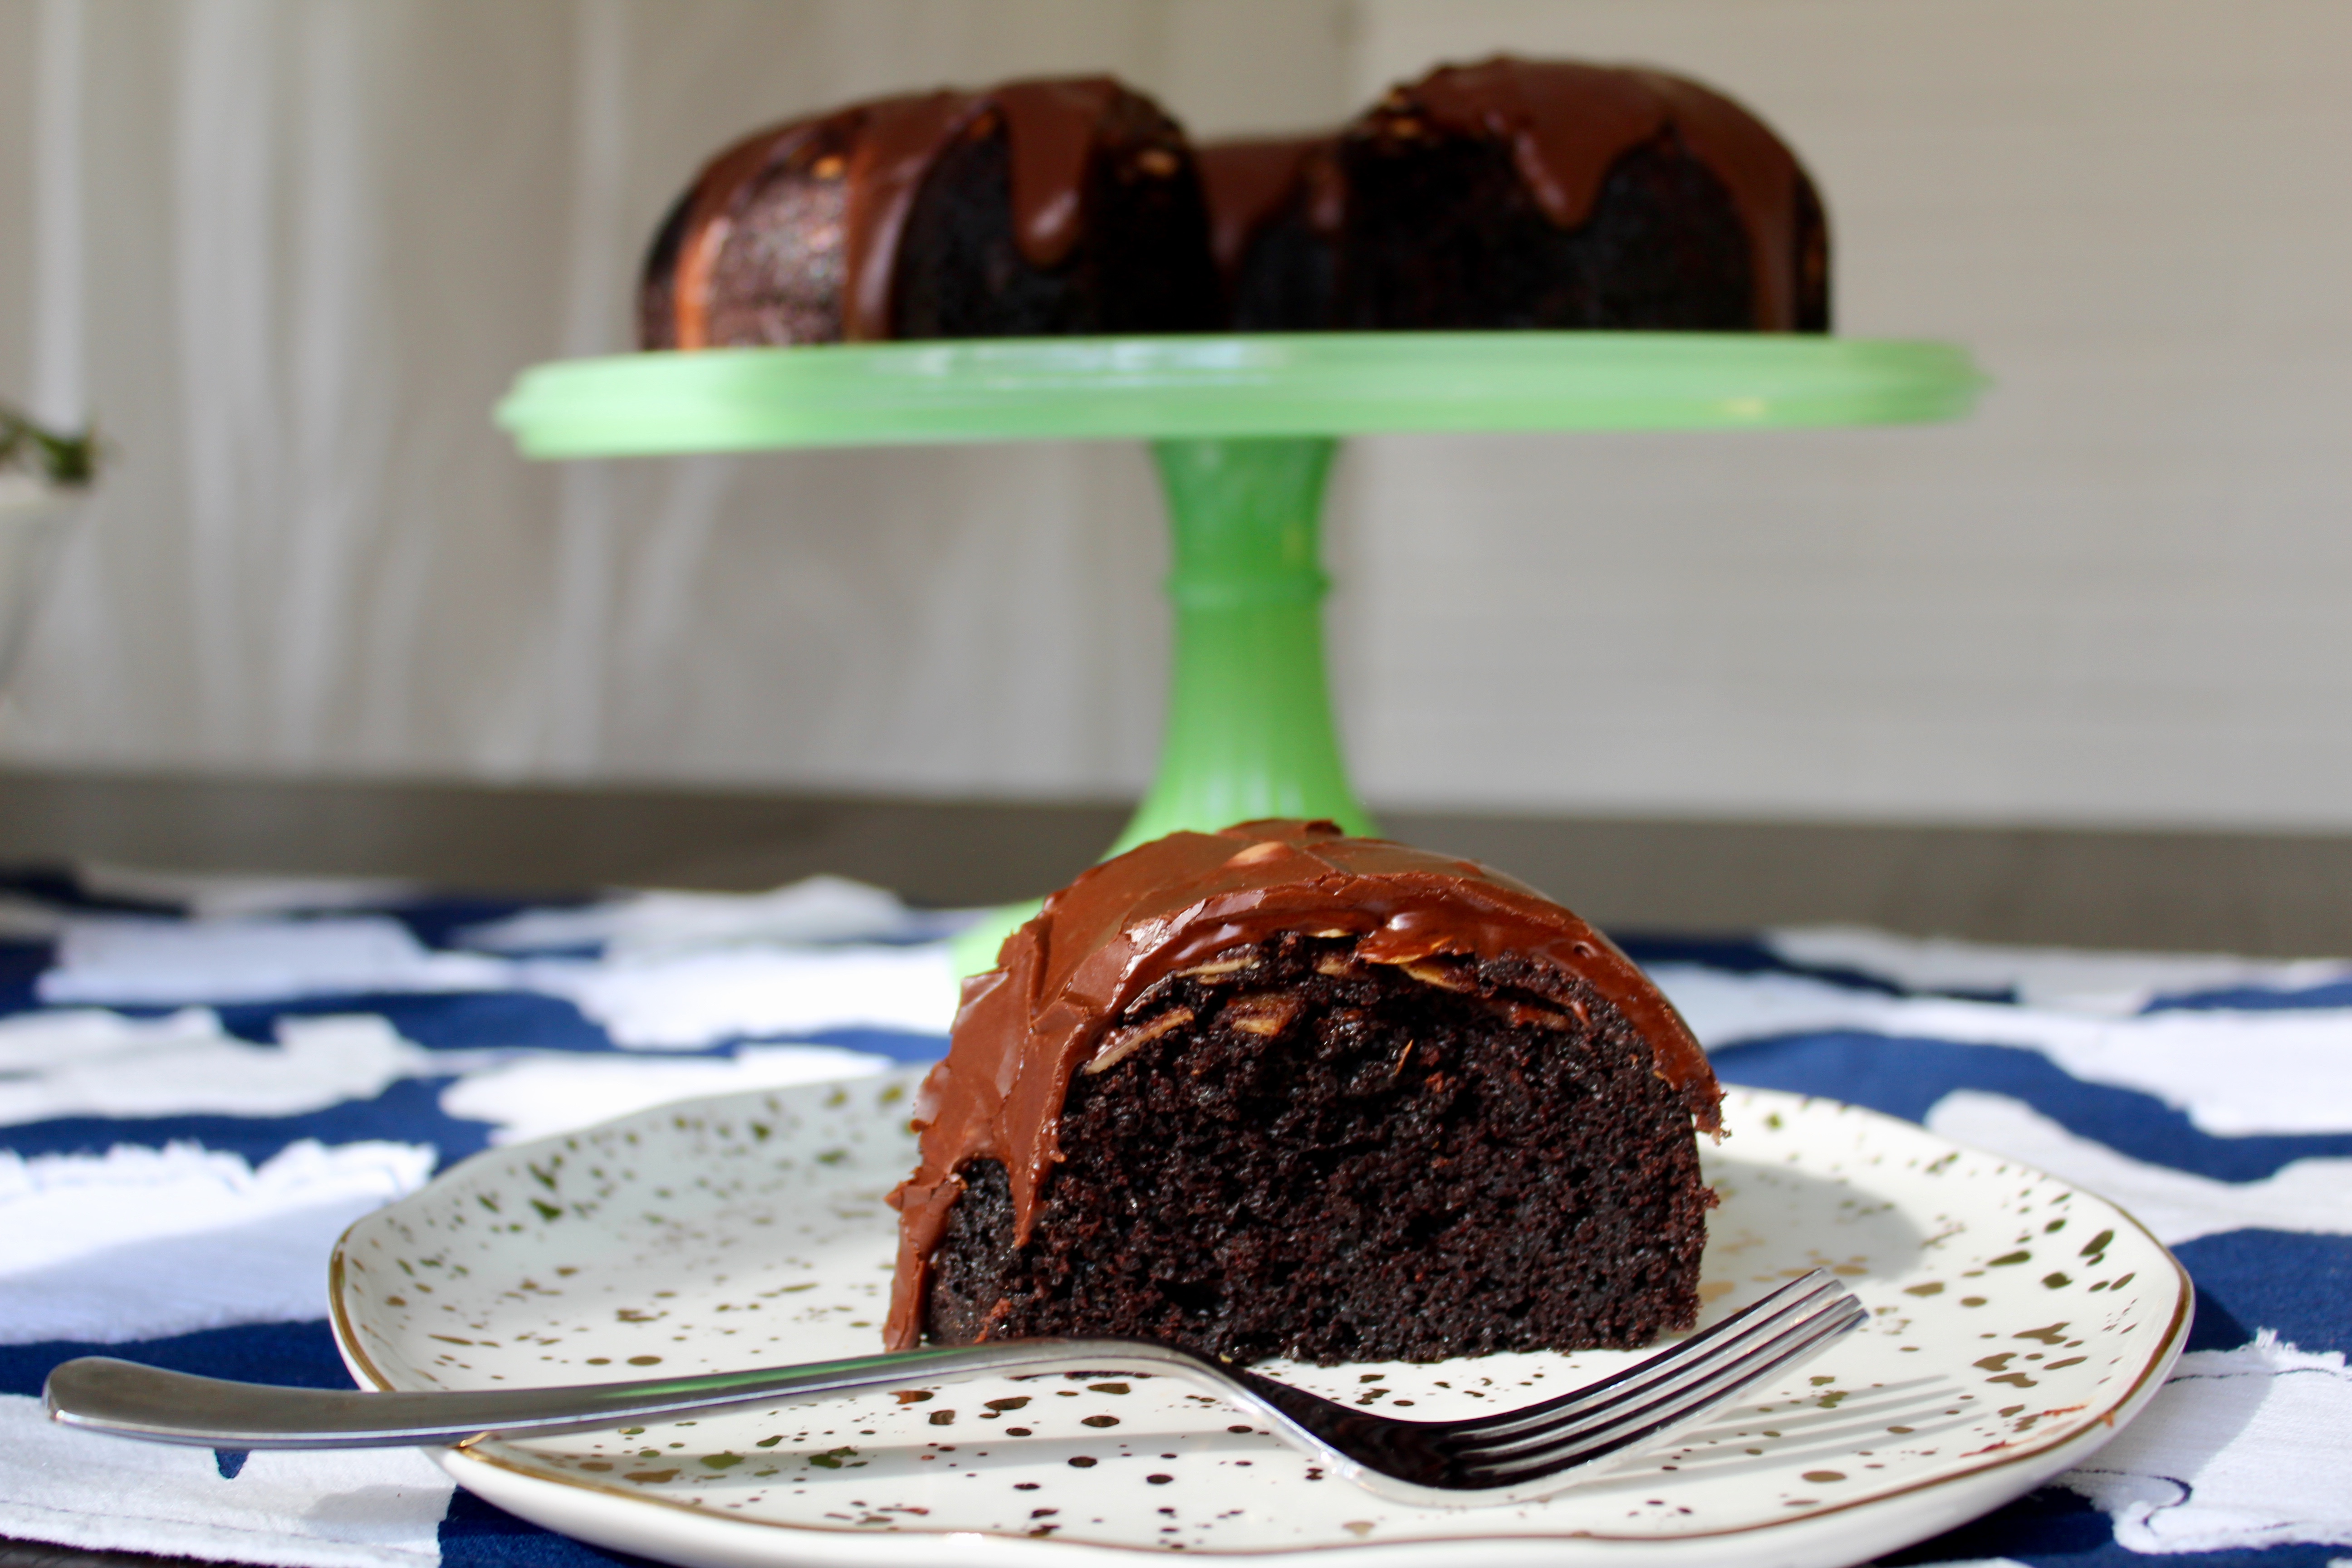 Slice in and find a hidden layer of toasted almonds nestled between the chocolate glaze and rich, moist cake.